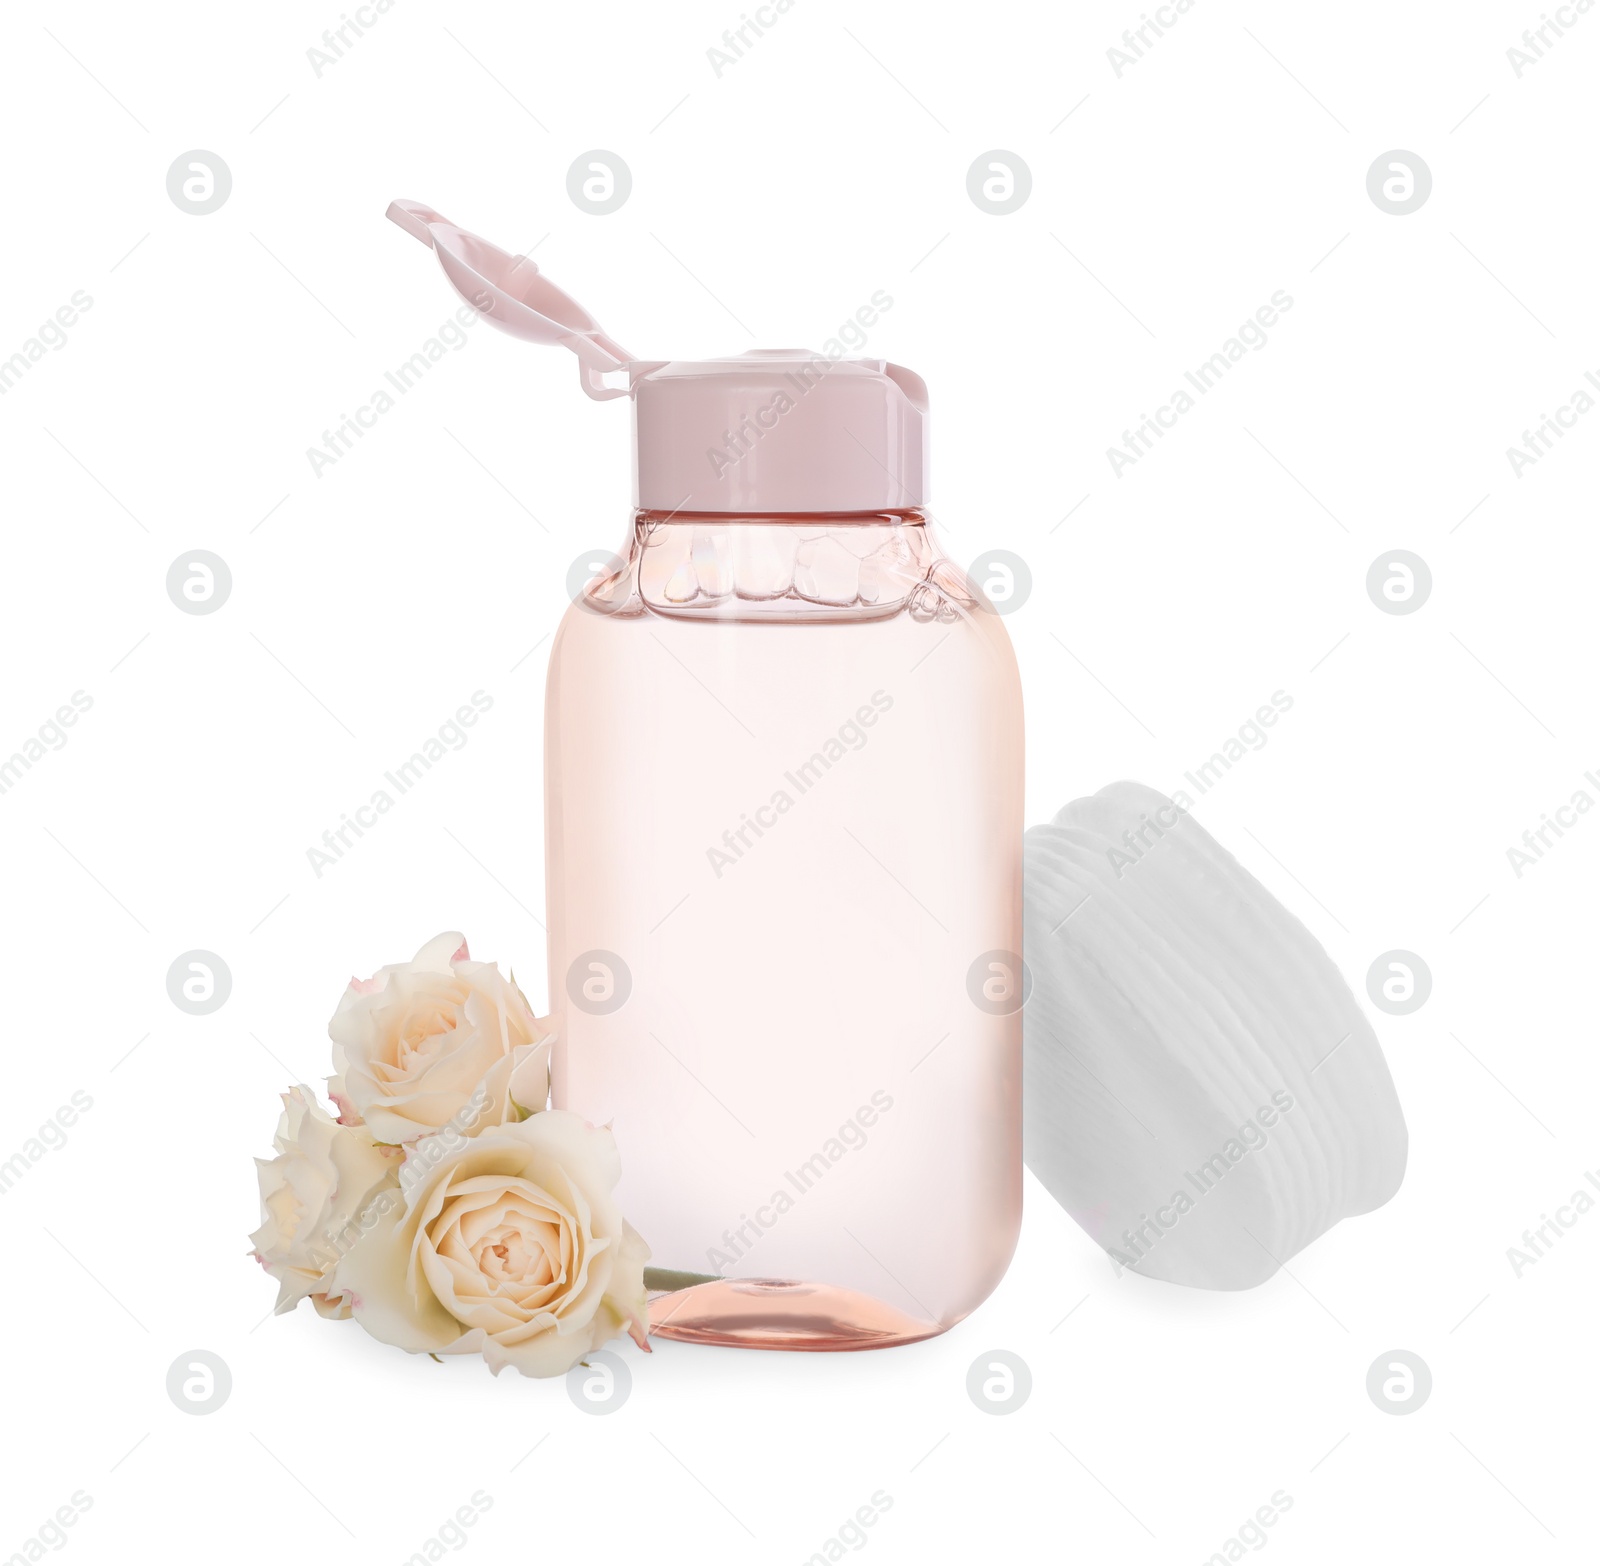 Photo of Bottle of micellar cleansing water and flowers on white background